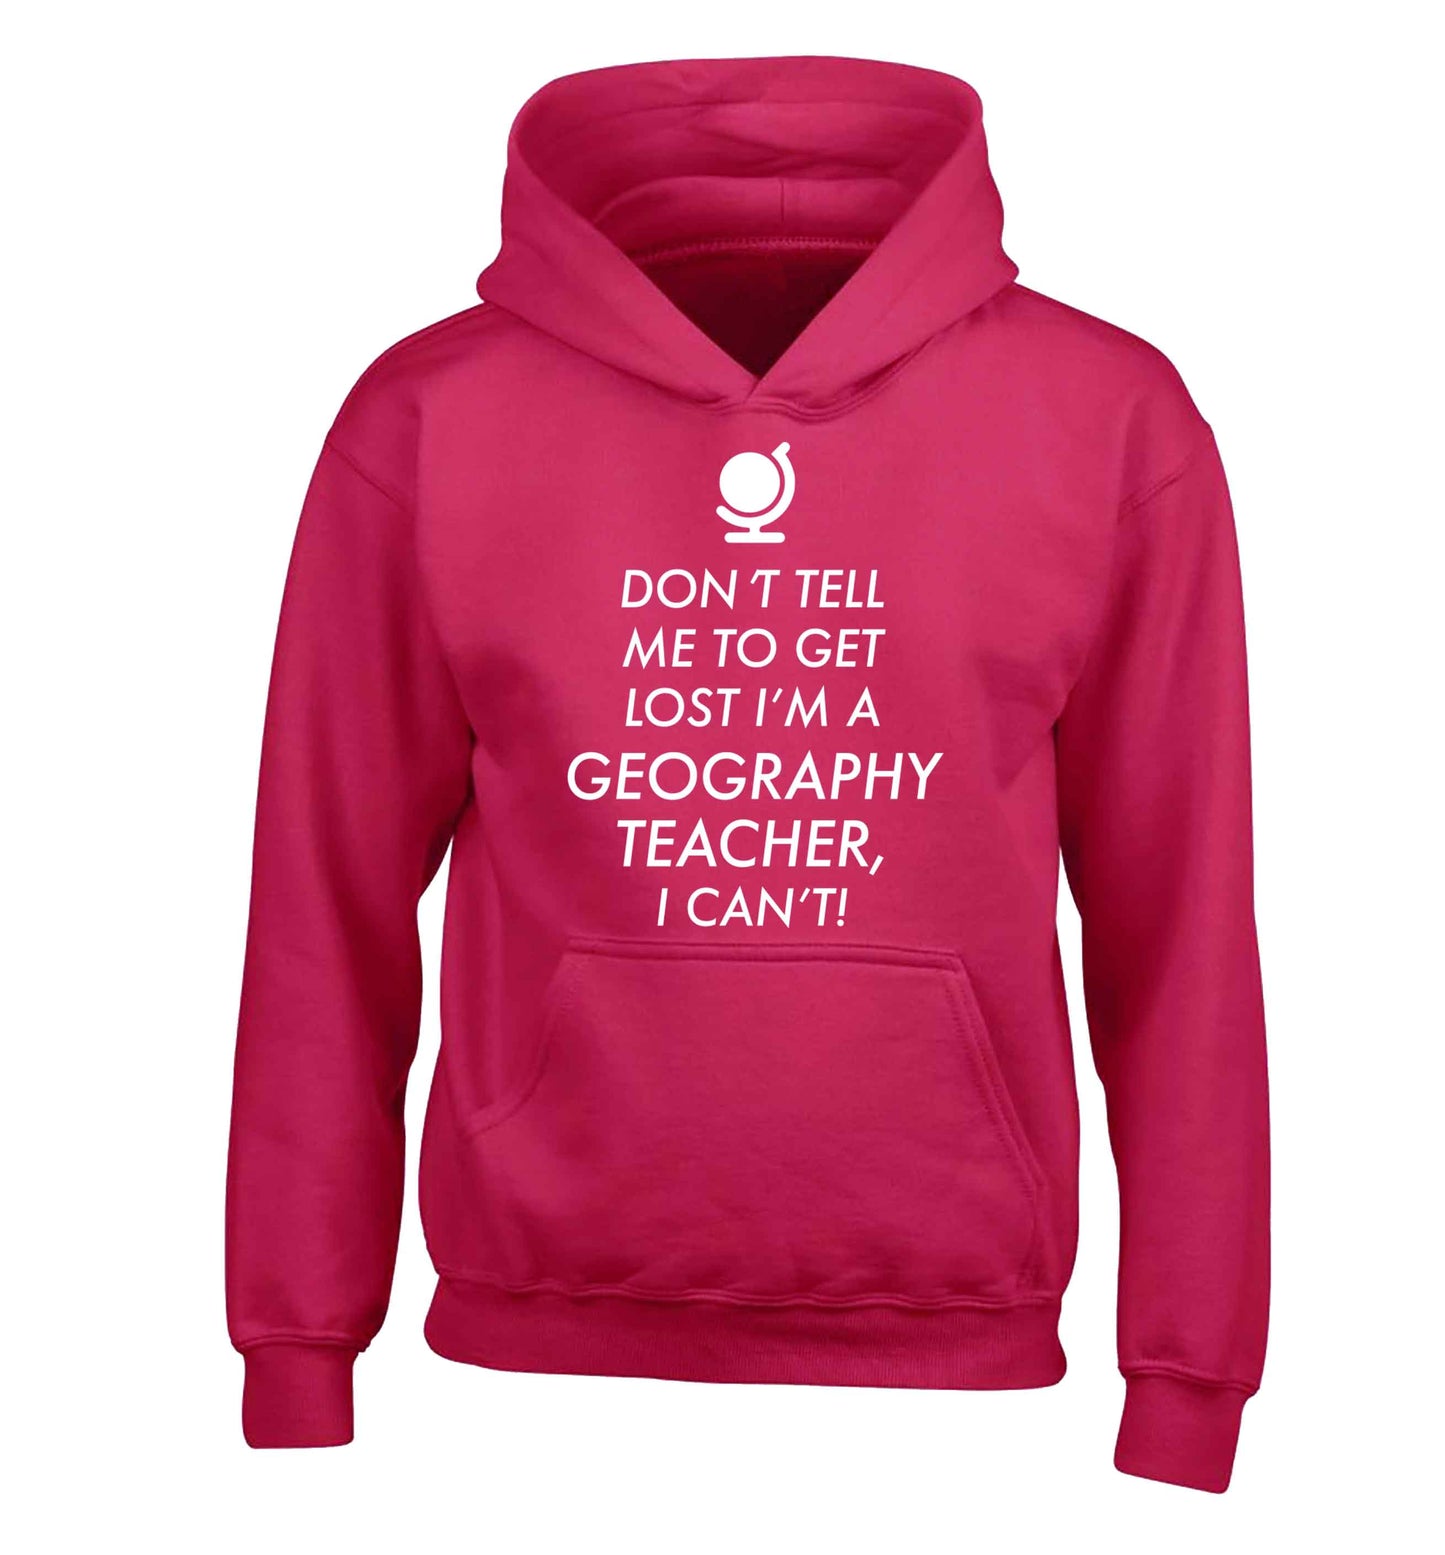 Don't tell me to get lost I'm a geography teacher, I can't children's pink hoodie 12-13 Years